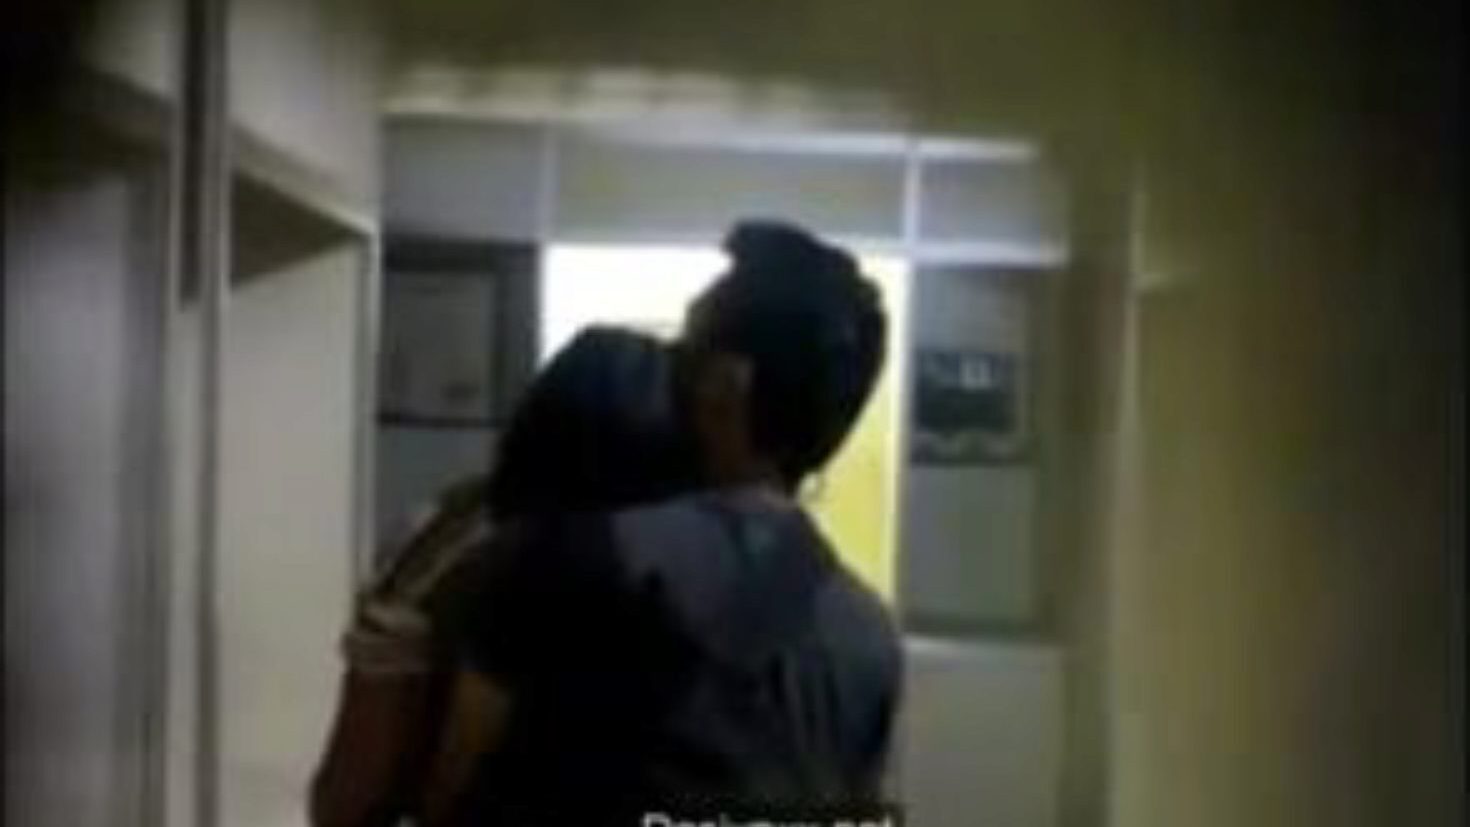 College Lovers Kissing in Store Room, Porn 7a: xHamster Watch College Lovers Kissing in Store Room movie on xHamster, the most good fucky-fucky tube web resource with tons of free Indian Men Kissing & Xxx College porn movie scenes